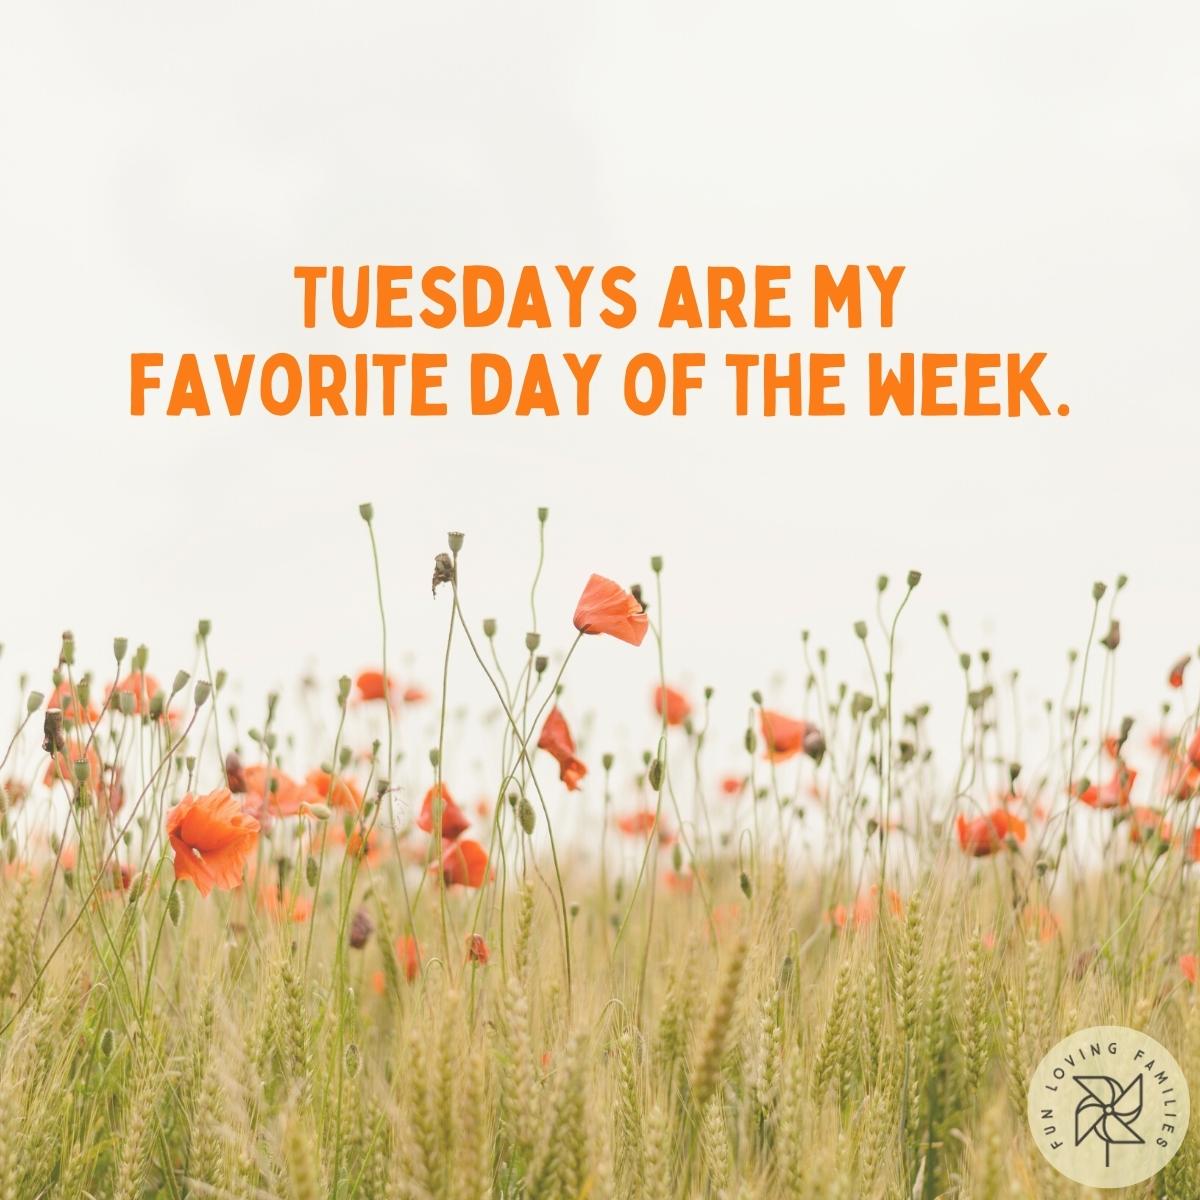 Tuesdays are my favorite day of the week affirmation image